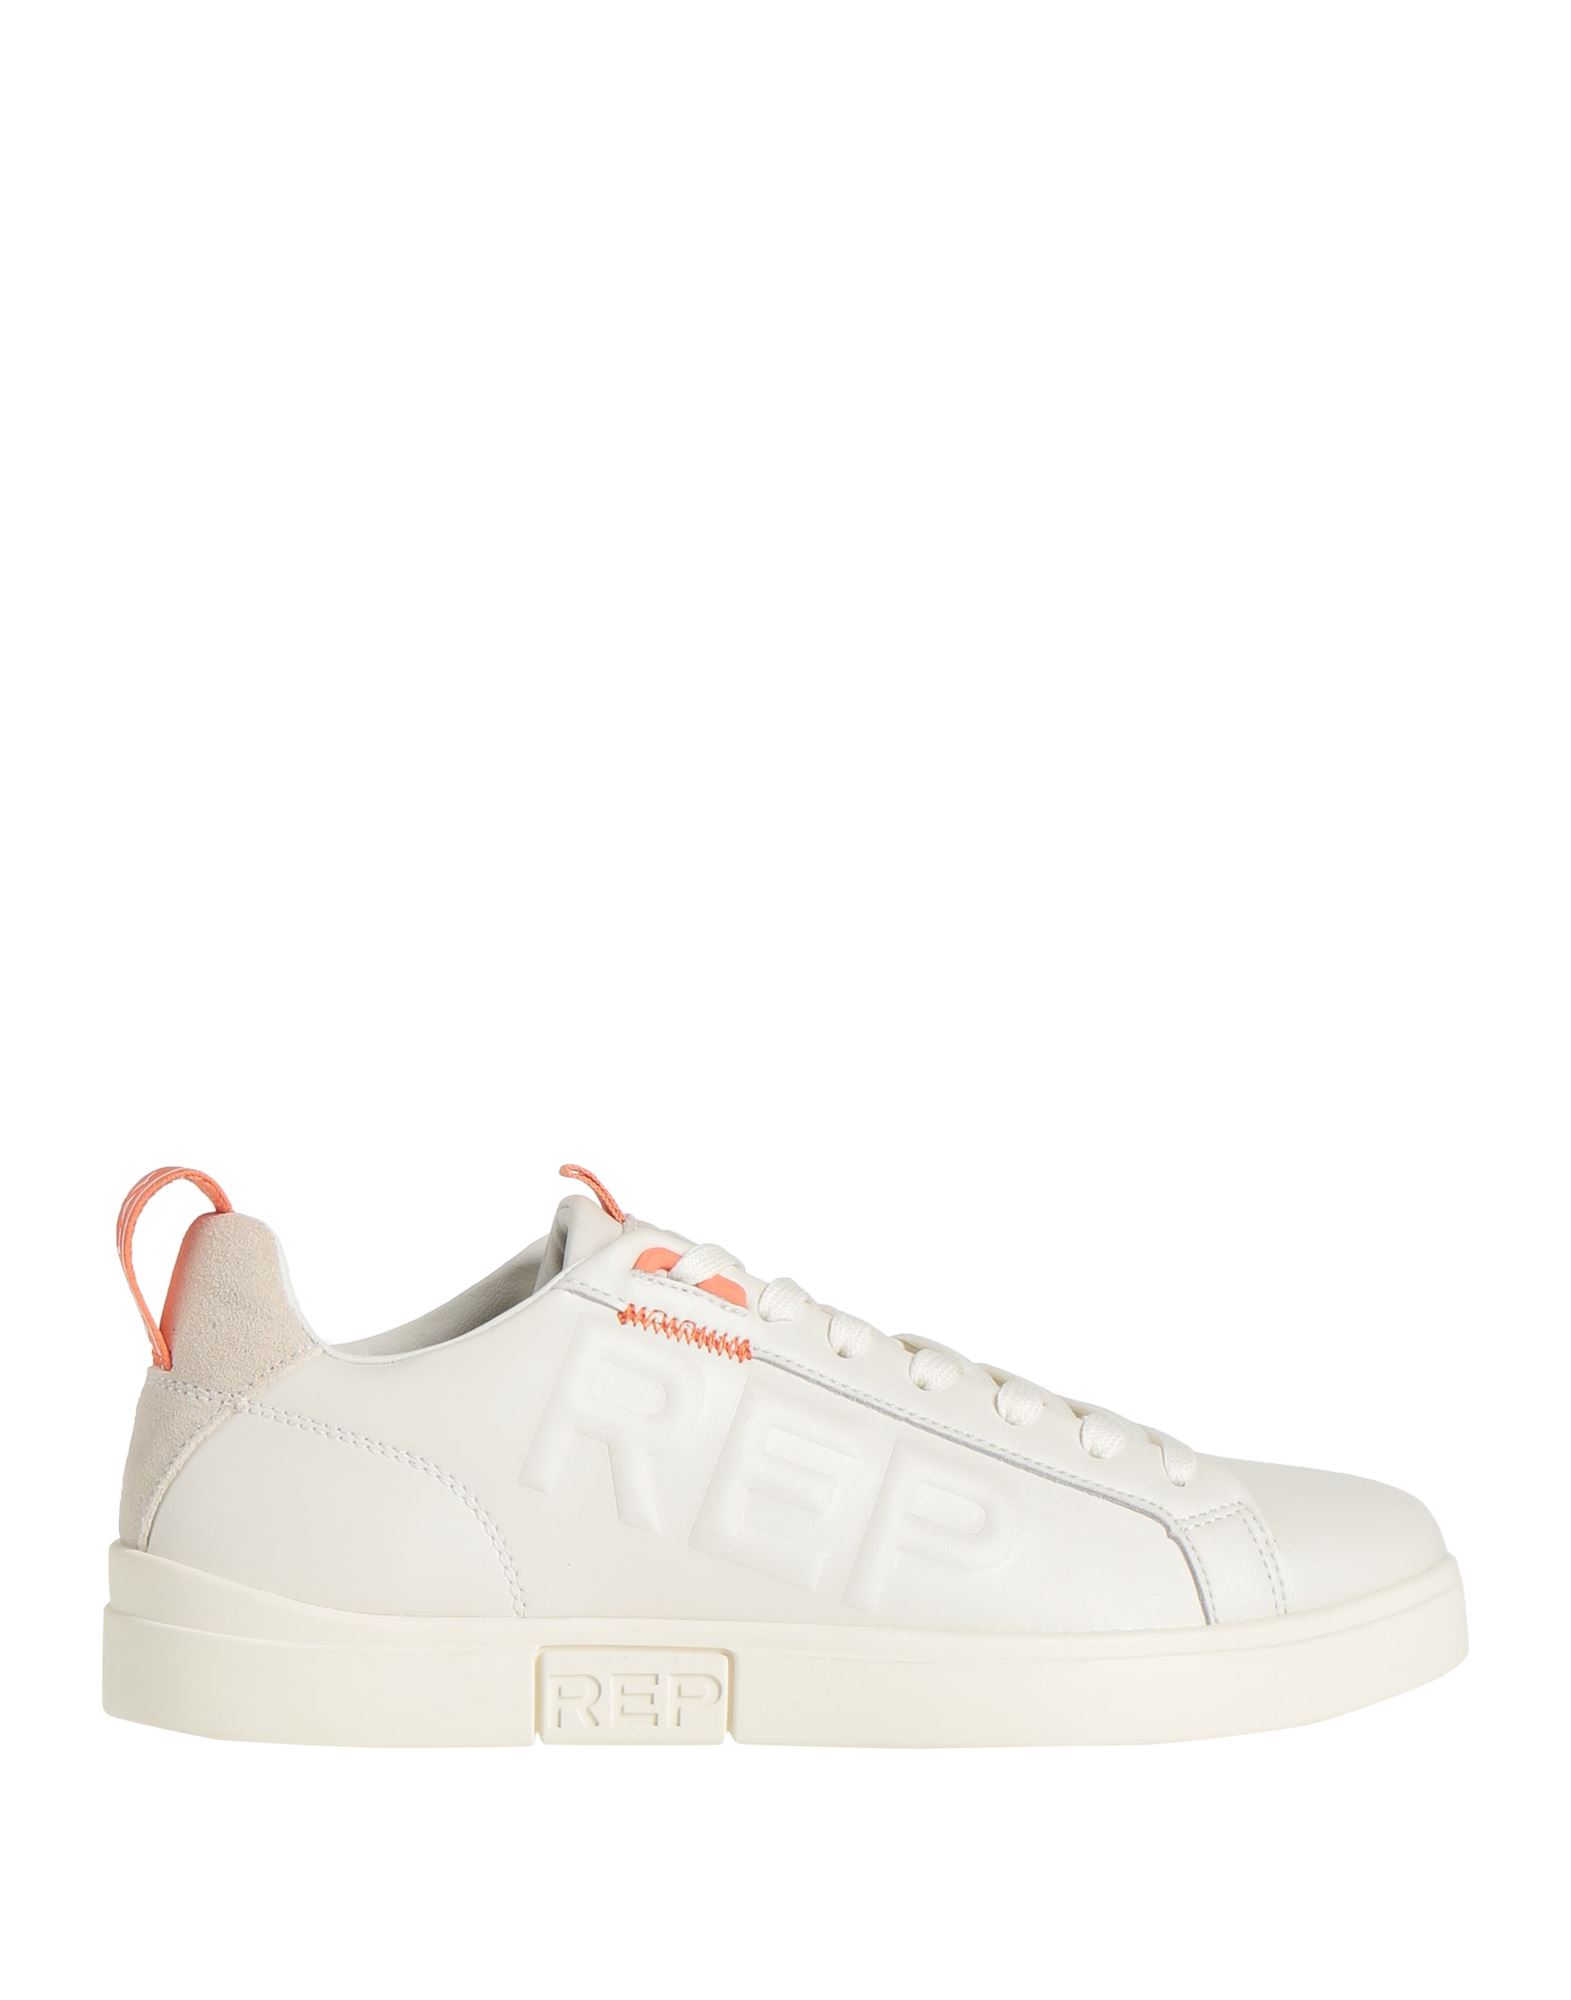 REPLAY TENNET SIGN RS6I0011T OFF-WHITE SNEAKERS